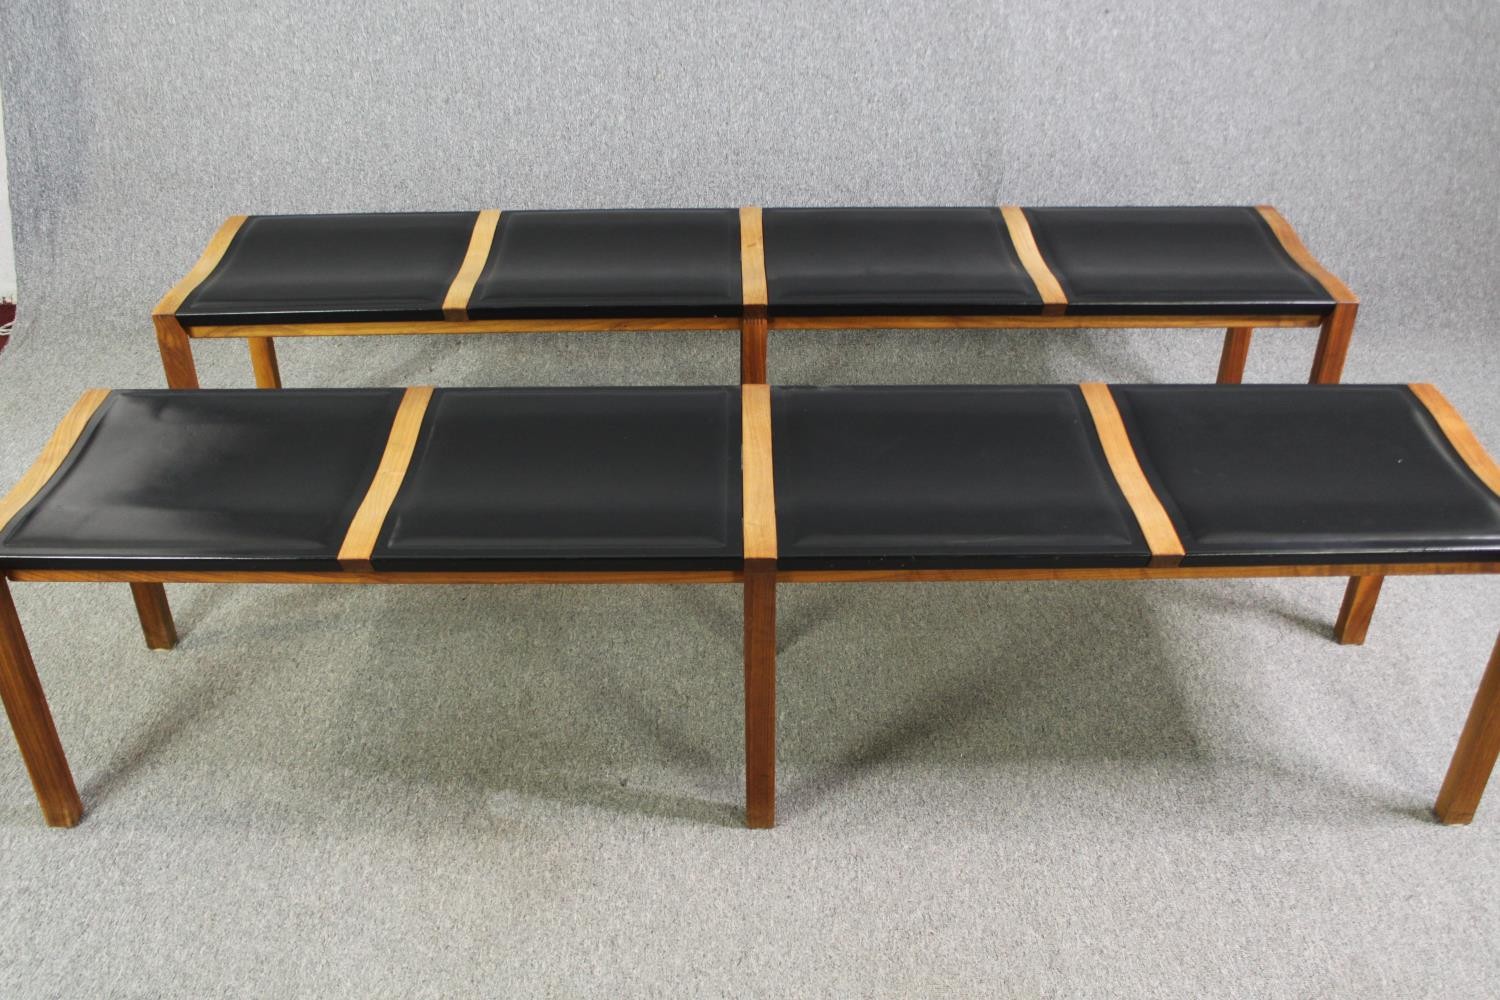 A pair of contemporary Heal's teak and black leather dining benches. H.48 W.200 D.45cm. (each).